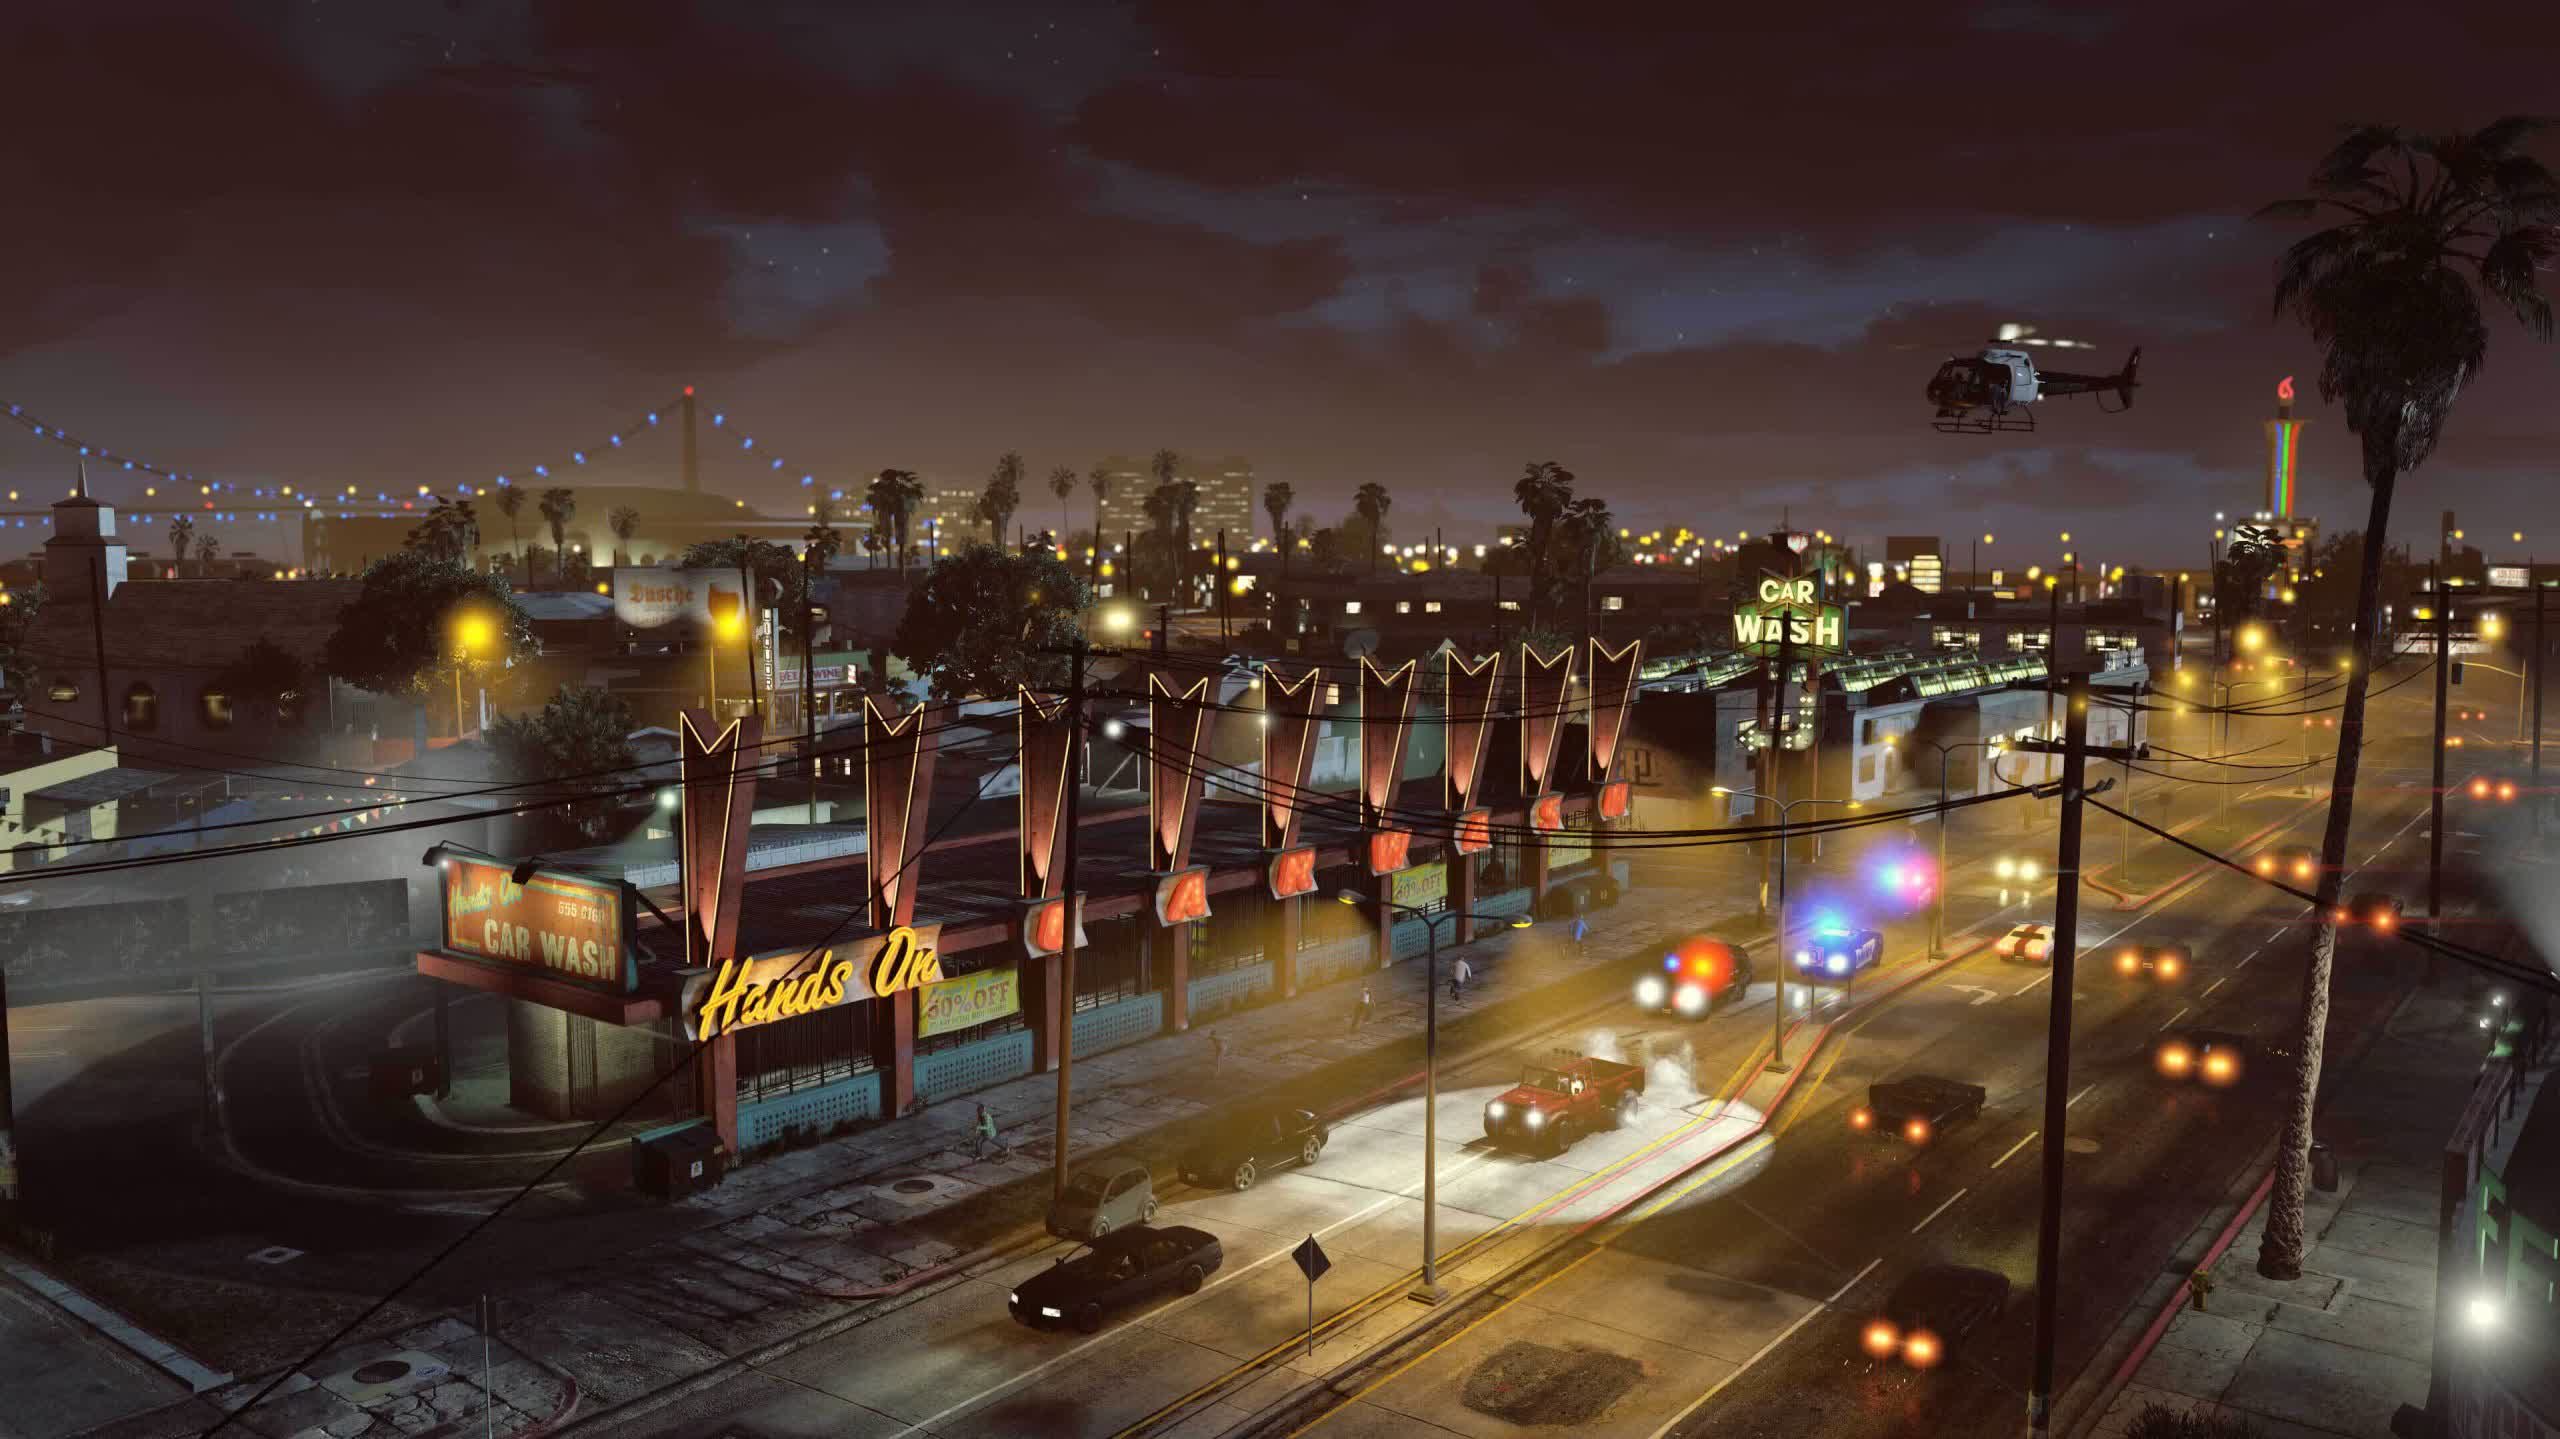 City of London Police arrest alleged GTA VI leaker with assistance from FBI and NCCU